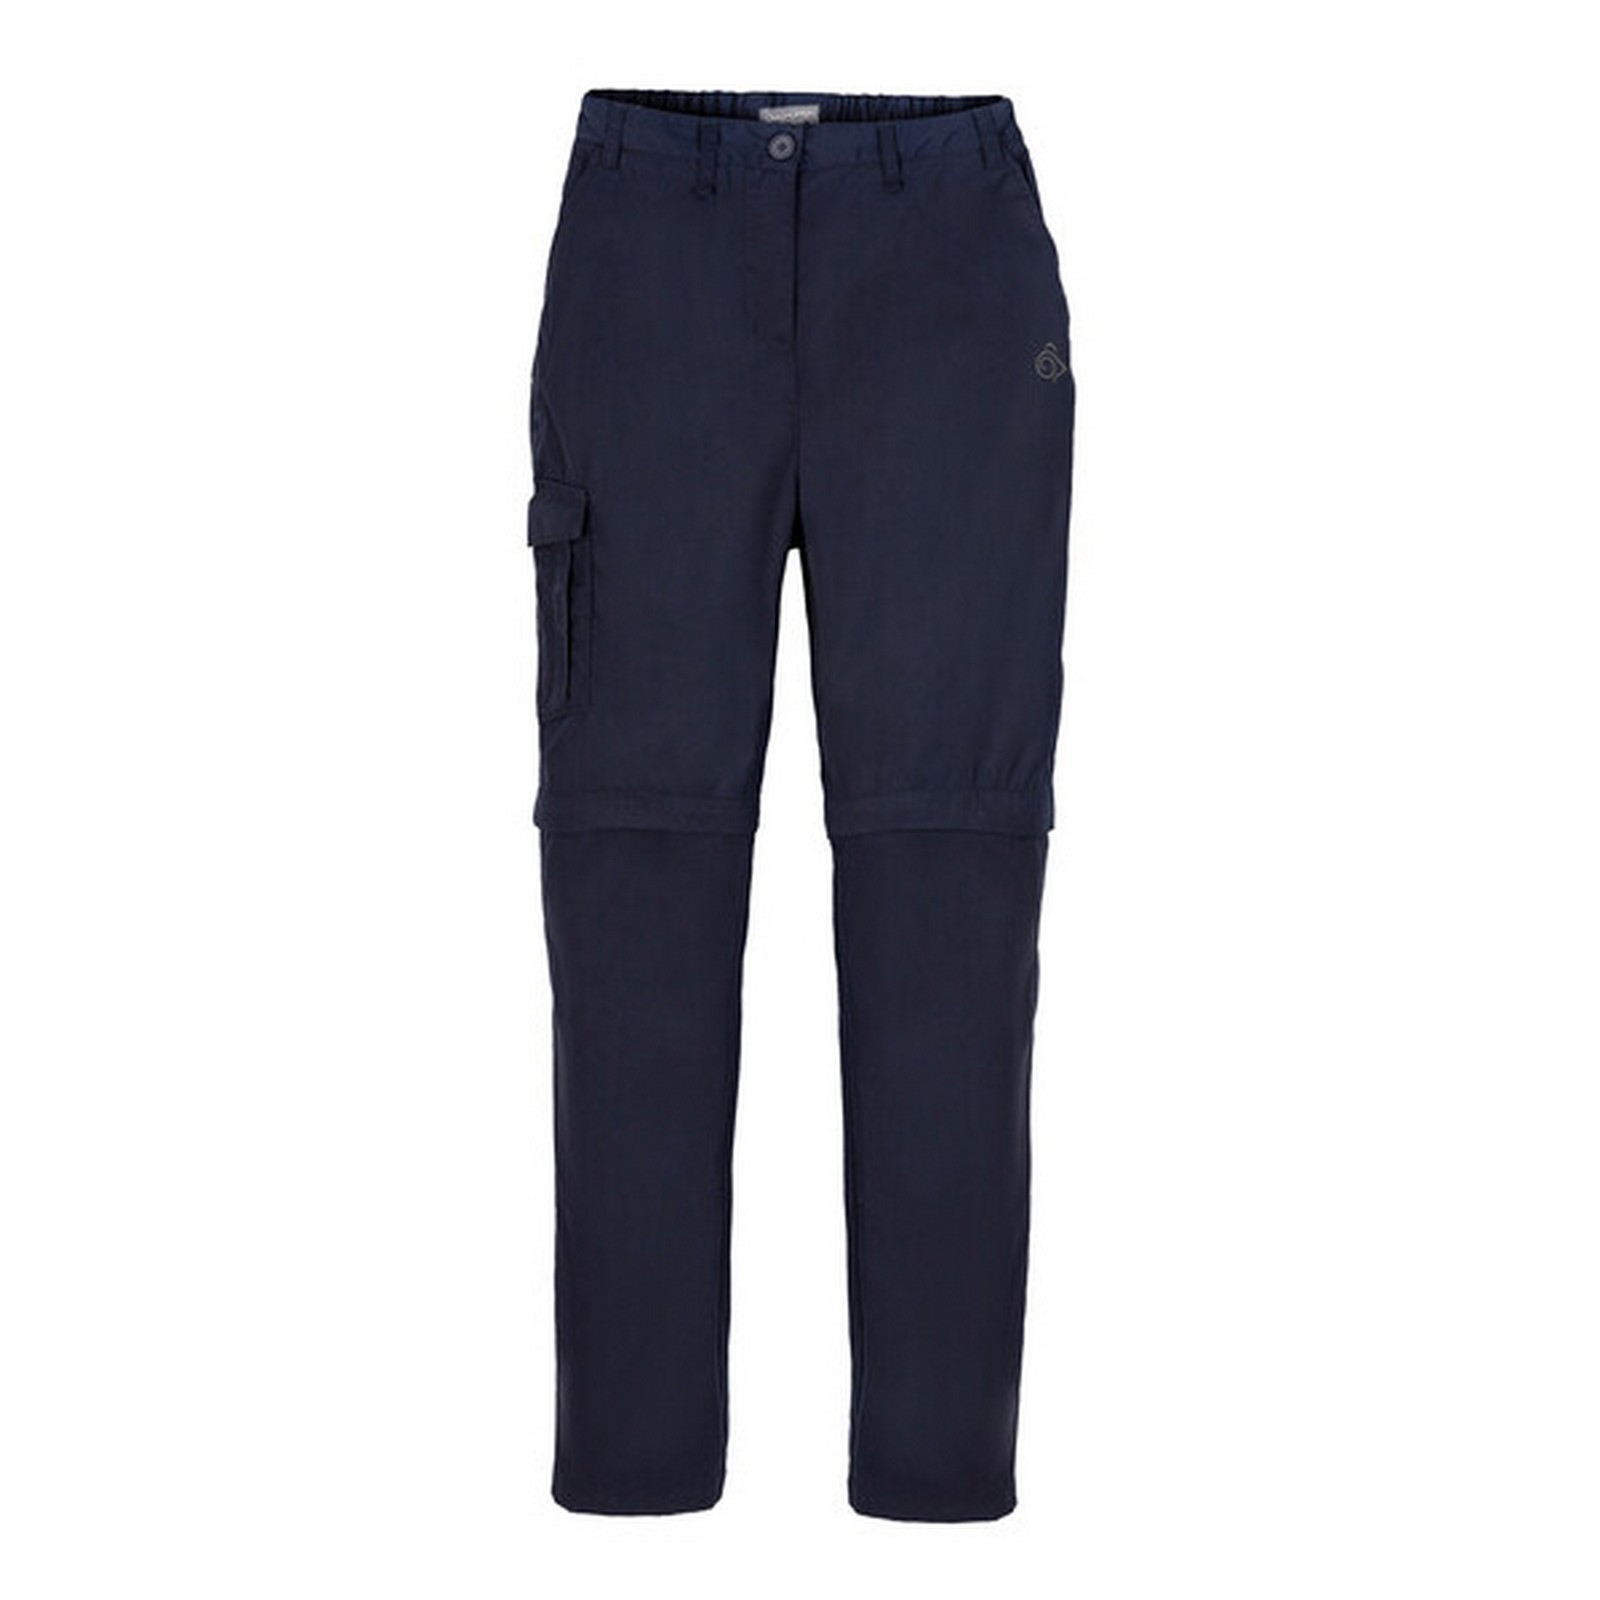 Craghoppers Kiwi Convertible zip-off trousers ladies | WISE Worksafe